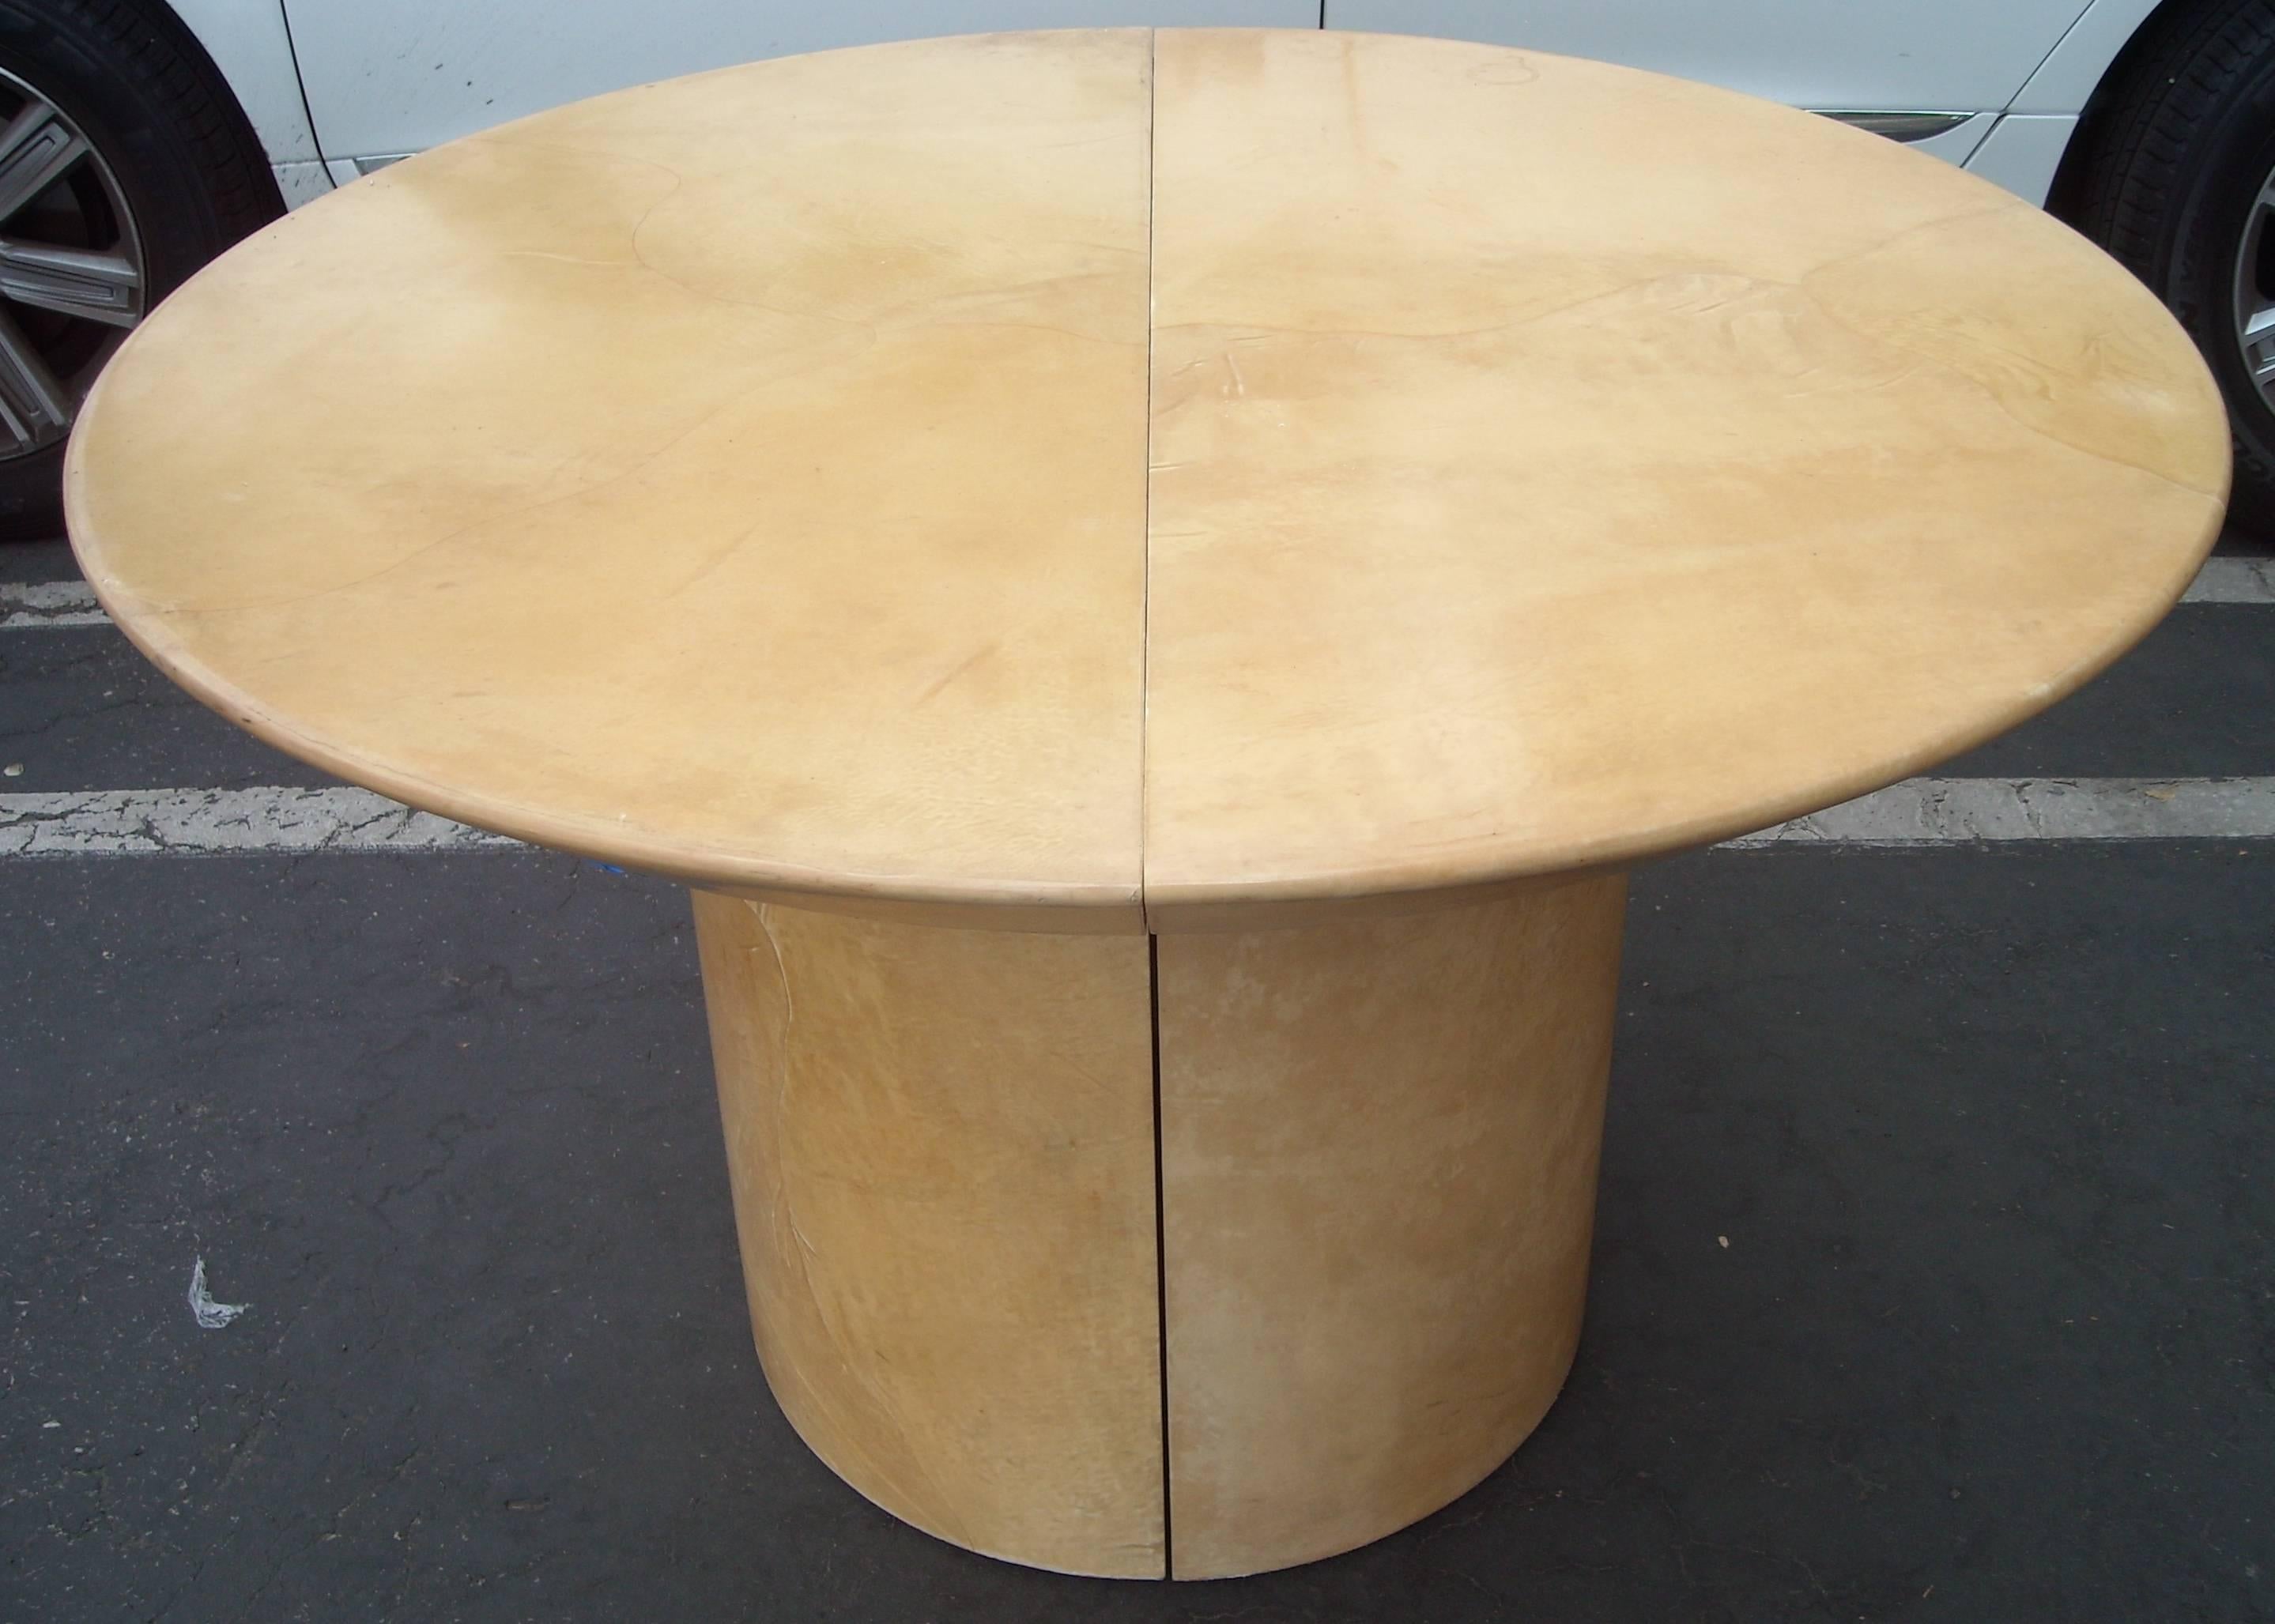 This is an amazing dining table in goatskin. We could not find any label, but there are several designers in the 1980s that have designed parchment goatskin tables, Like Sally Sirkin Lewis , Karl Springer, etc. This table is round and diameter of 48